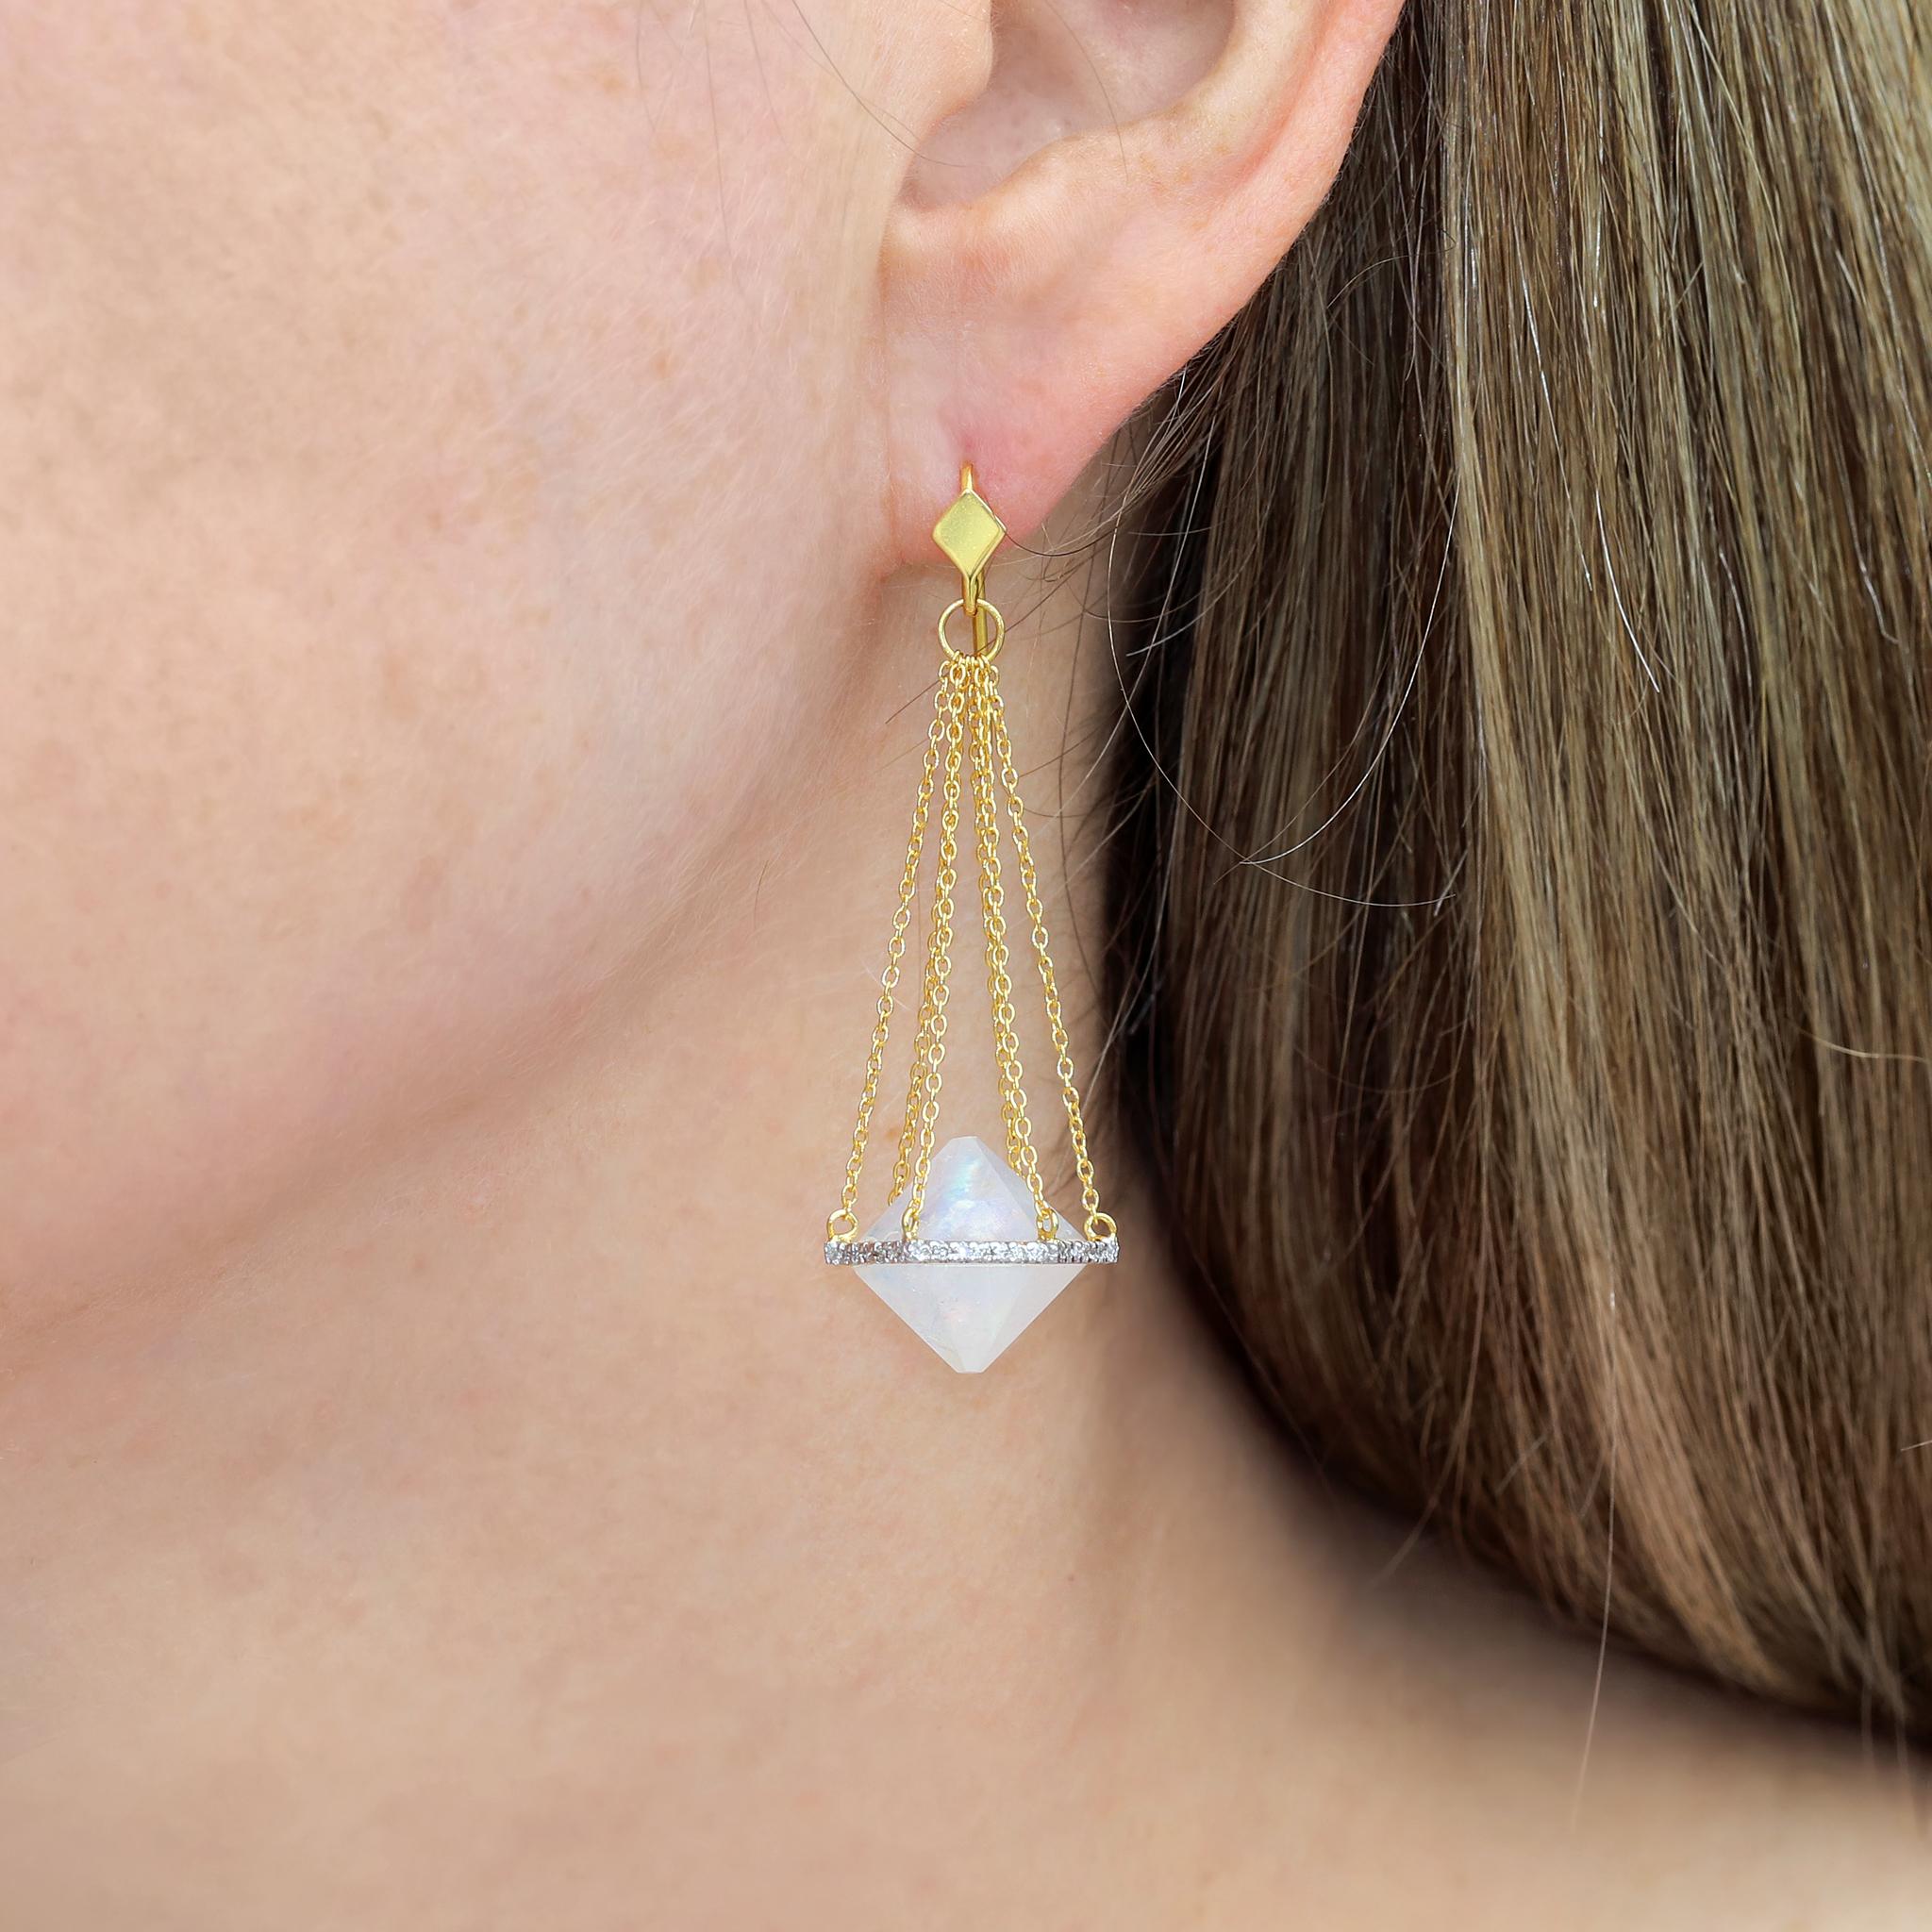 One of a Kind Balance Earrings by jewelry artist Lauren Harper hand-fabricated in 18k yellow gold featuring a matched pair of custom-cut and faceted hexagonal rainbow moonstones uniquely flush-set in hexagonal 18k white gold elements set with round